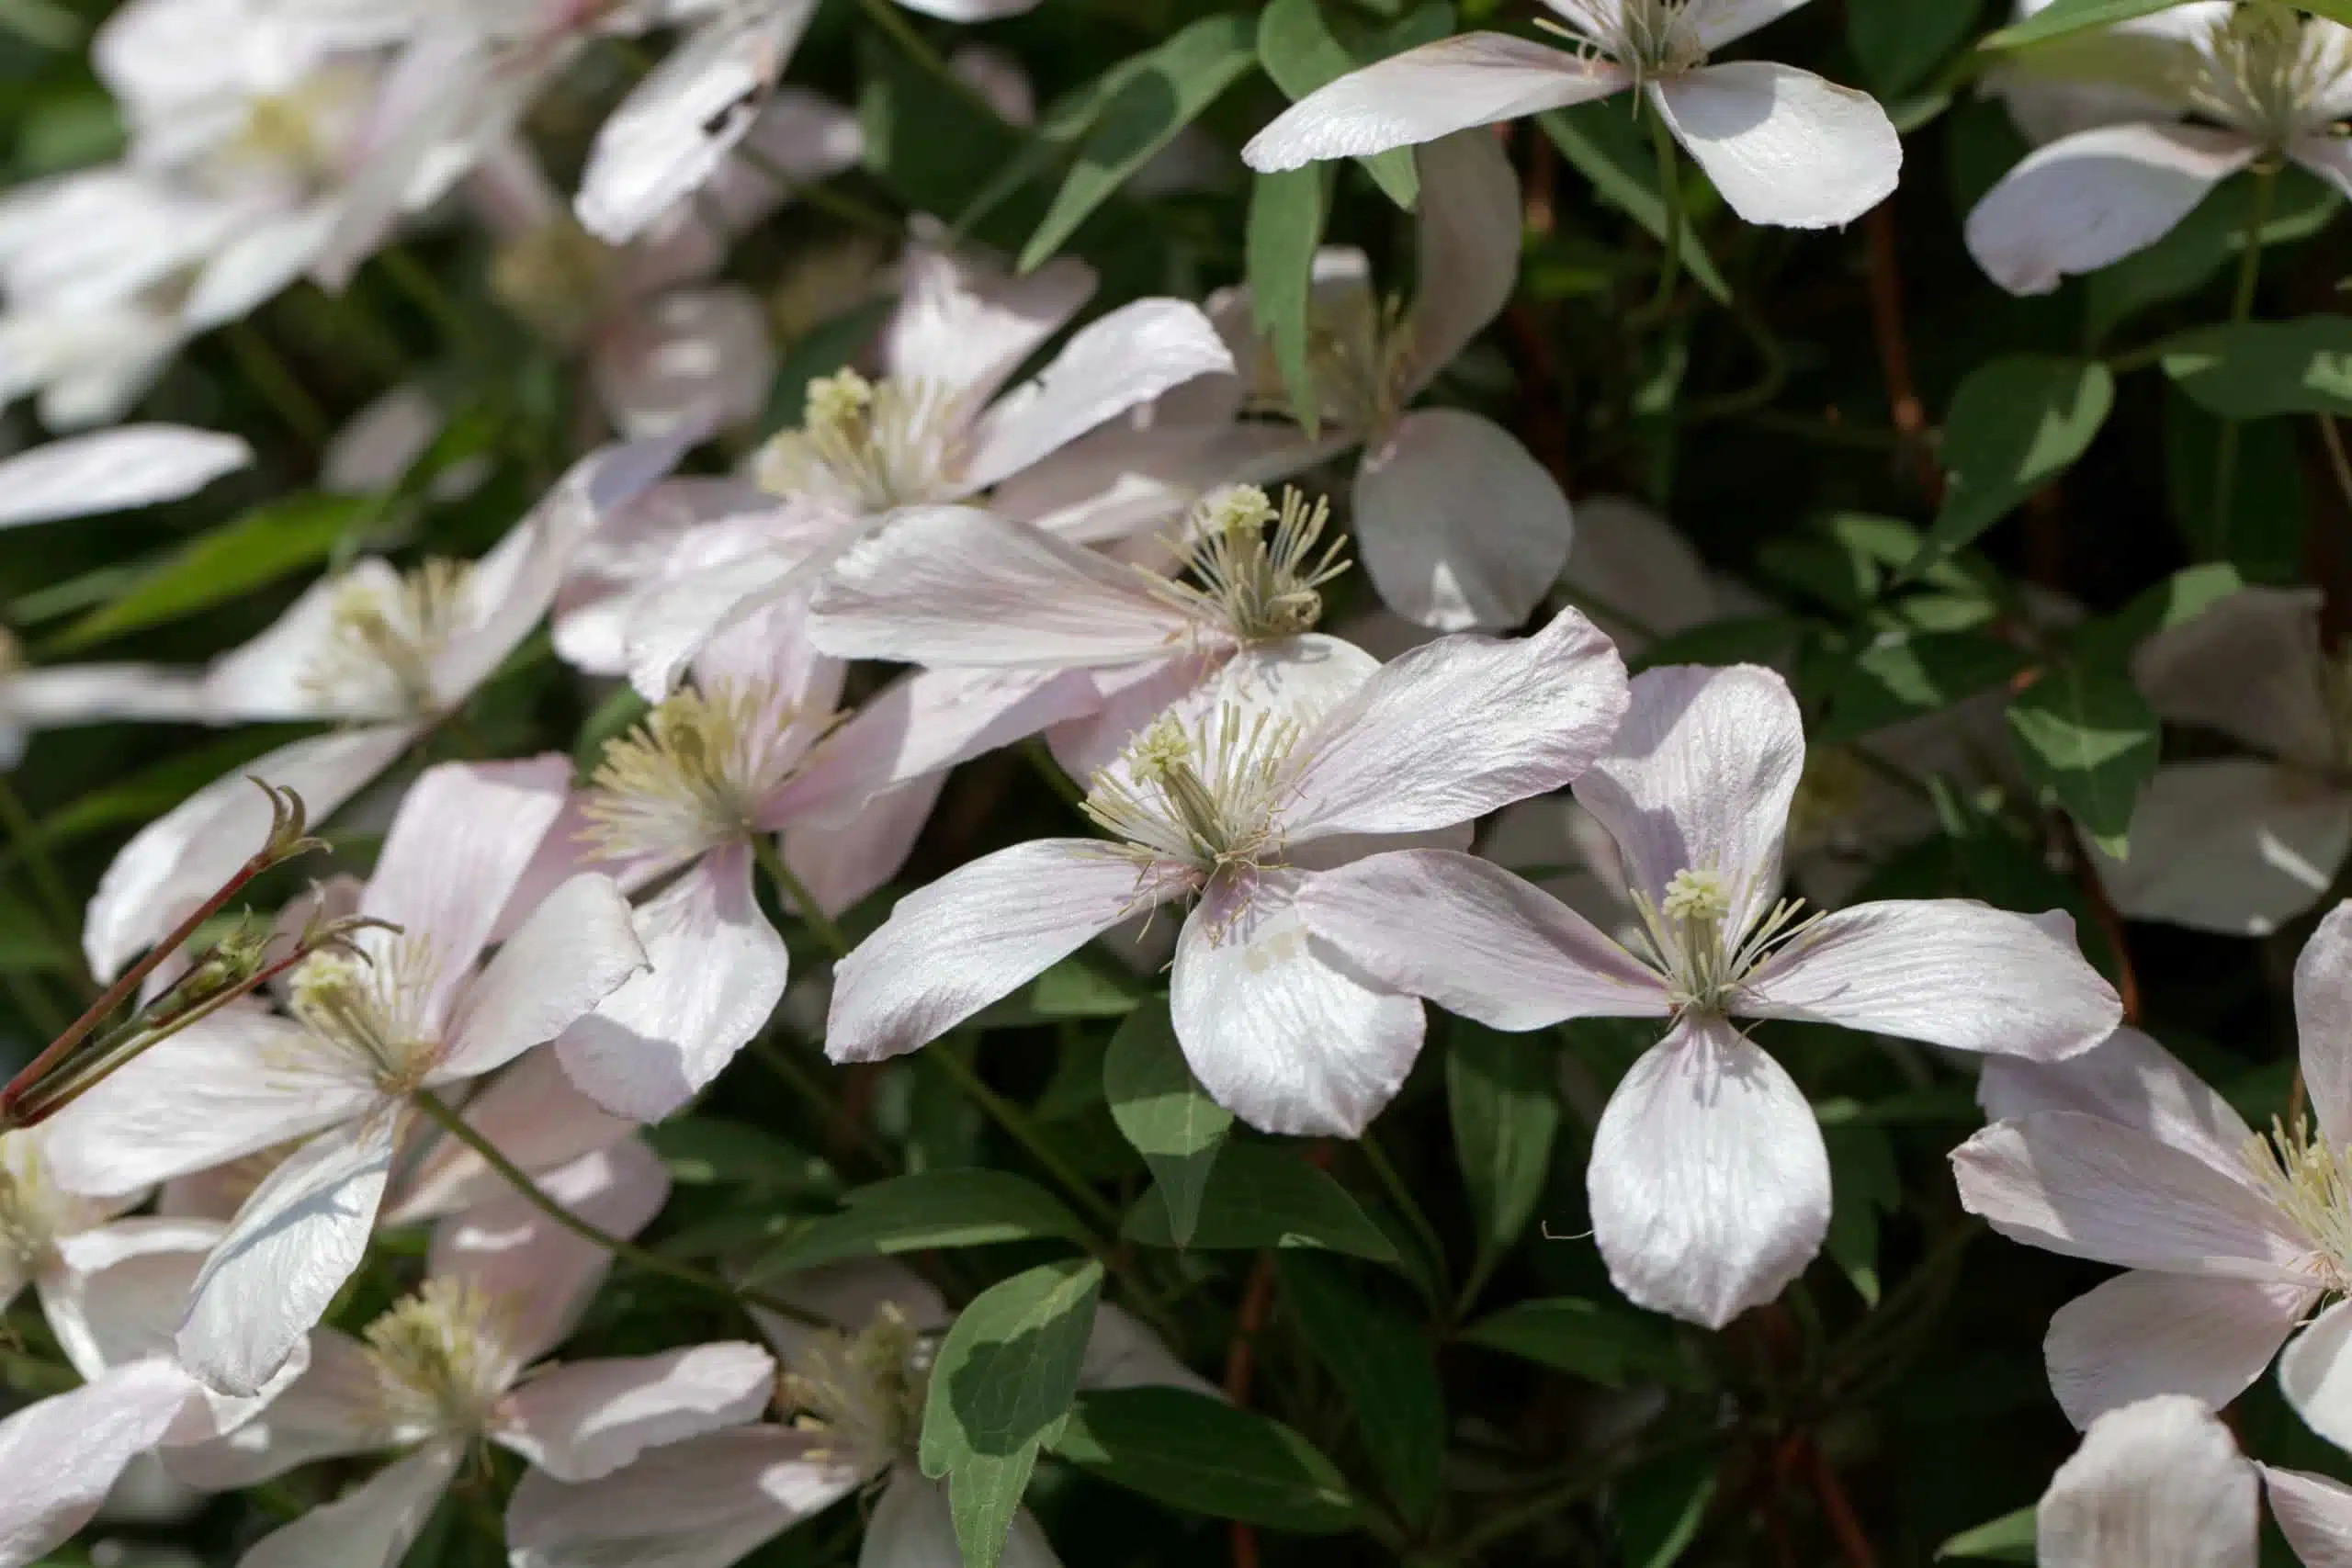 The Best Climbing Plants For Shade David Domoney